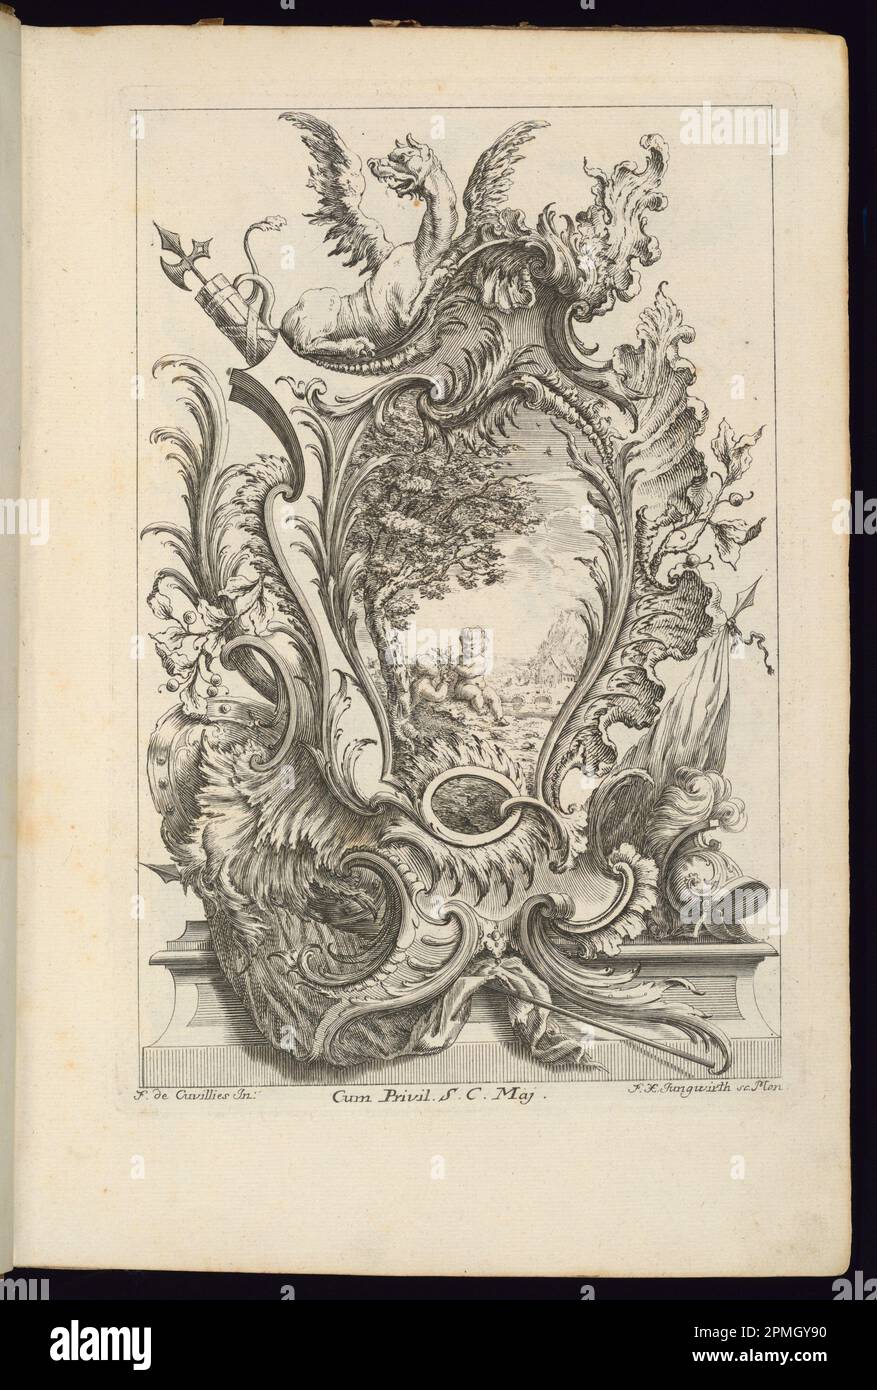 Bound Print, Cartouche with a Dragon and Armorial Trophy; Designed by François de Cuvilliés the Elder (Belgian, active Germany, 1695 - 1768); Print Maker: Franz Xaver Andreas Jungwierth (German, 1720–1790); Germany; etching and engraving on paper; 28.4 × 19 cm (11 3/16 × 7 1/2 in.) Stock Photo